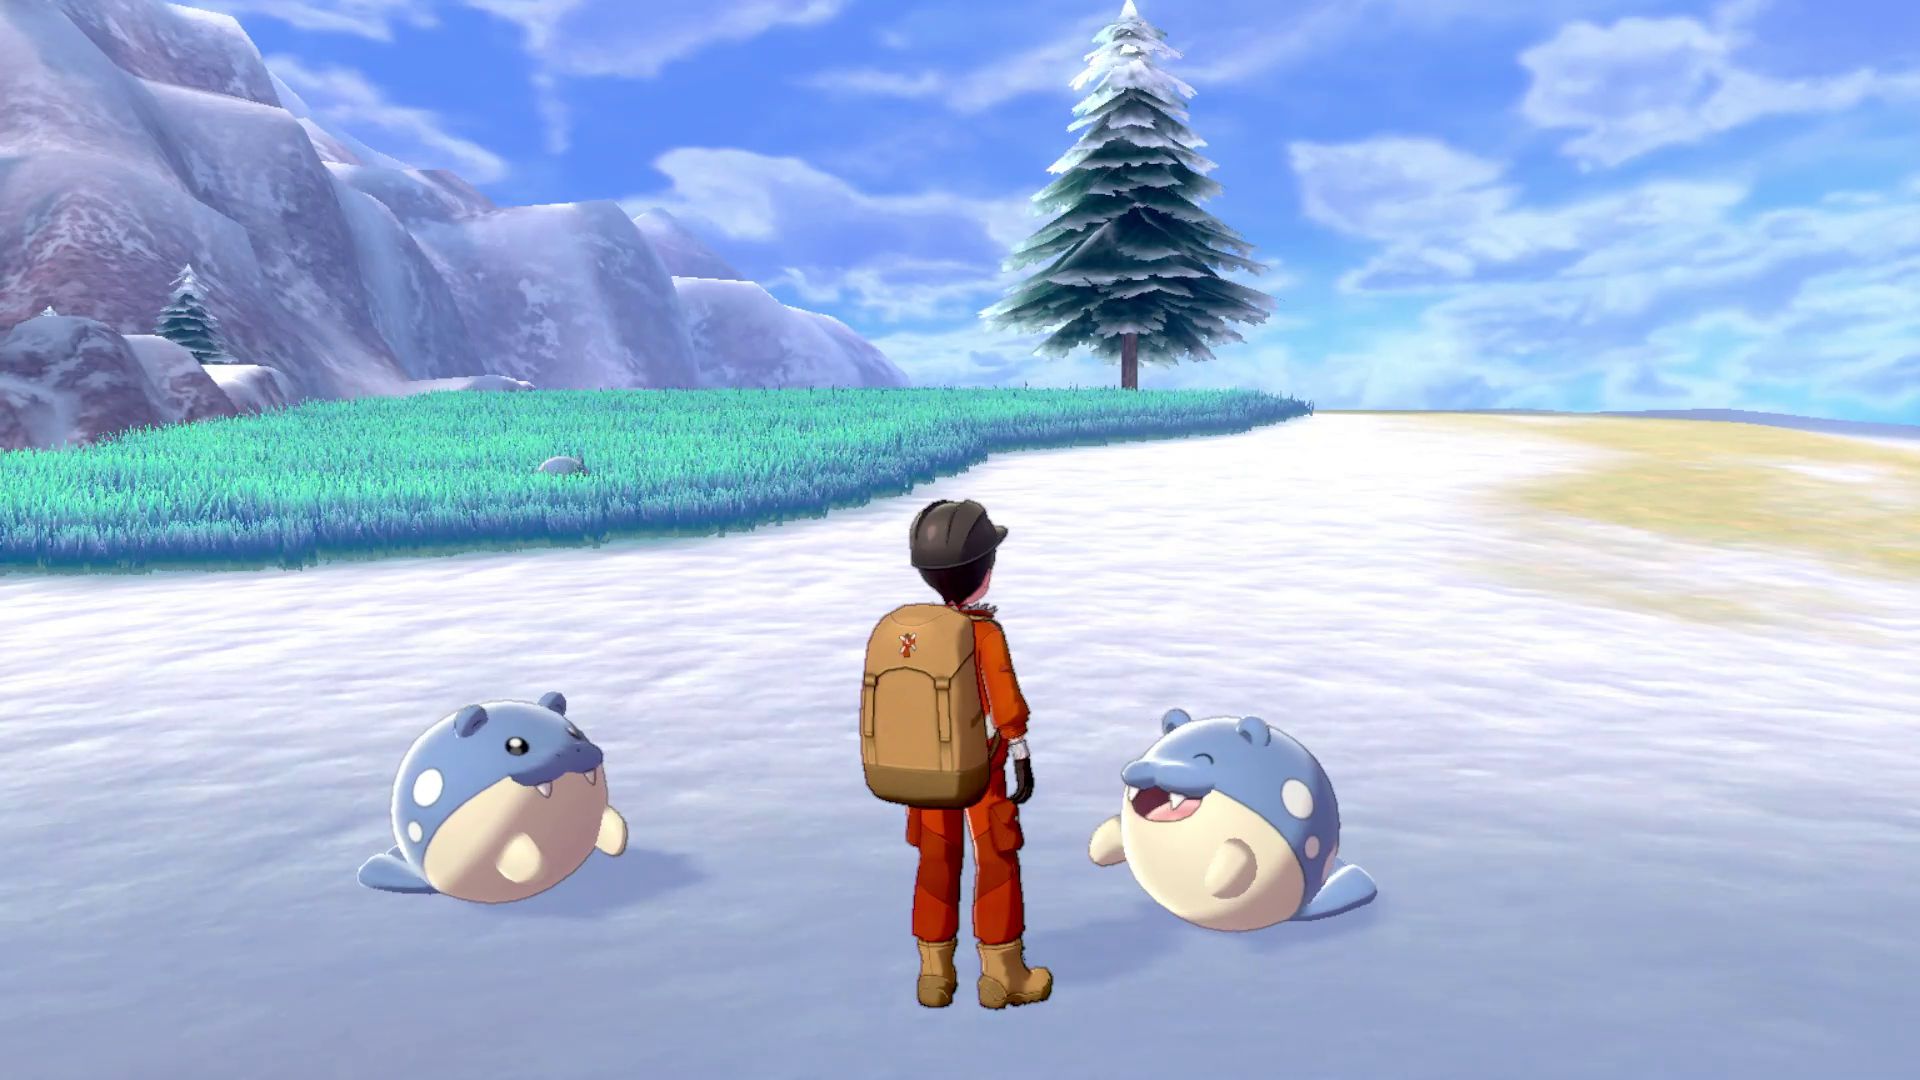 Pokemon Sword and Shield: How to get a free Dada Zarude and Shiny